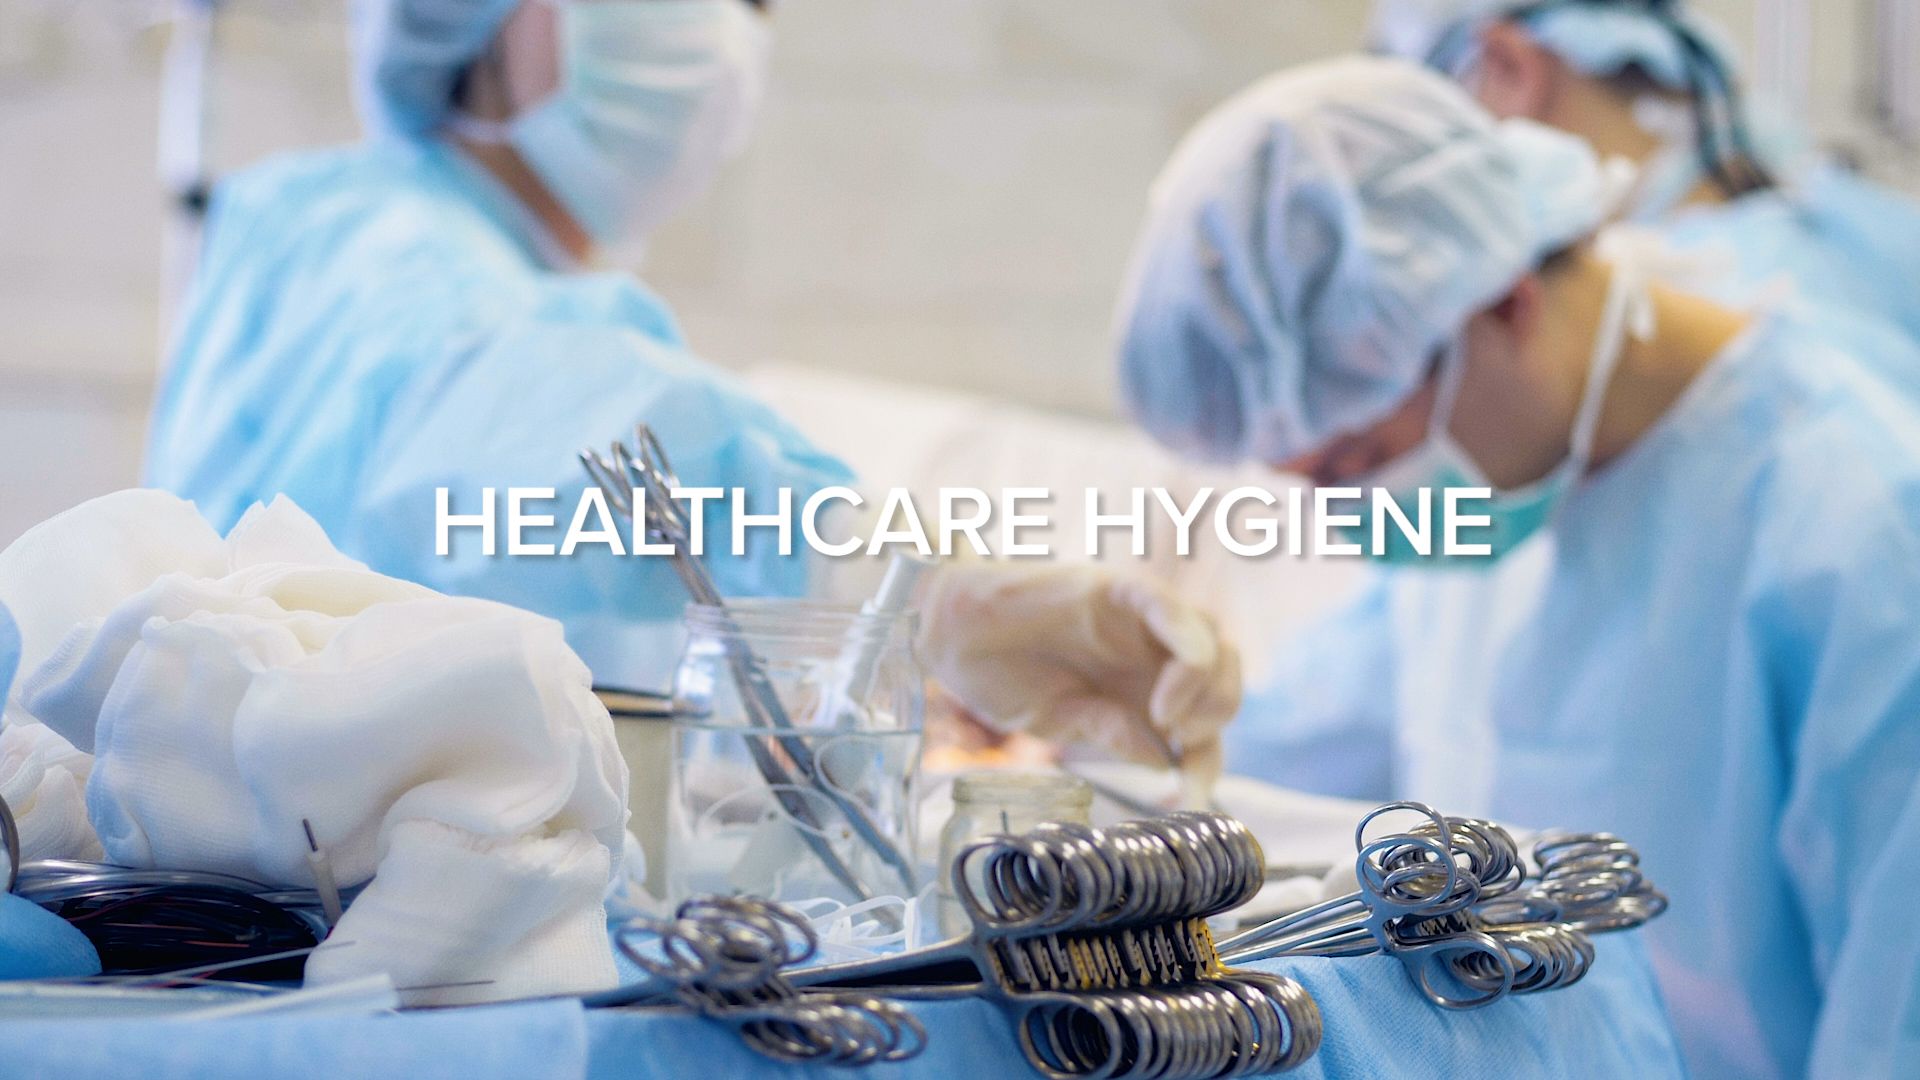 We provide you the tools for the best healthcare hygiene.